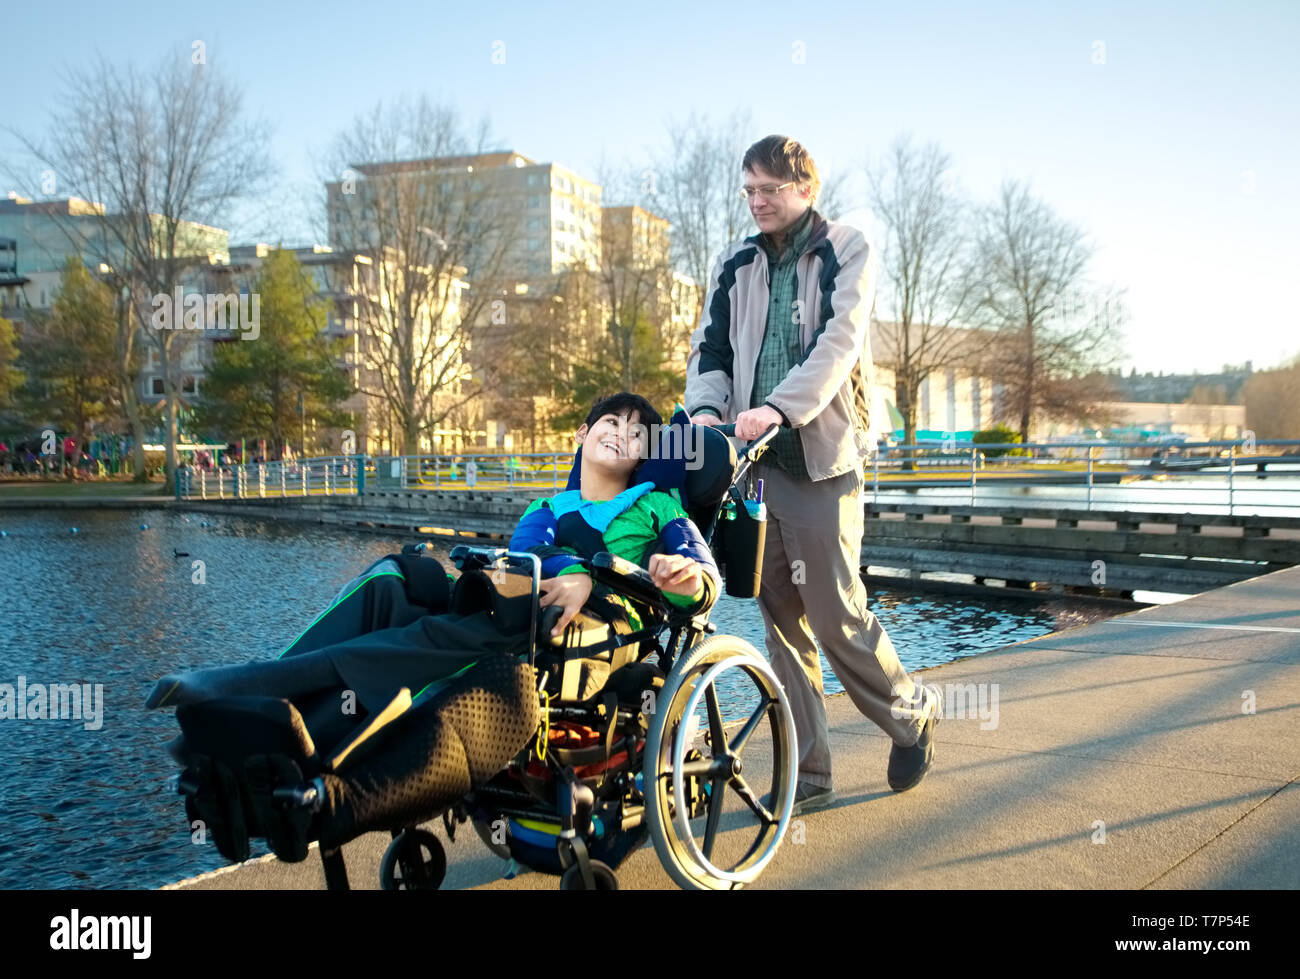 Caucasian father walking disabled biracial young son at park by lakle outdoors in early spring or summer. Child has cerebral palsy. Stock Photo